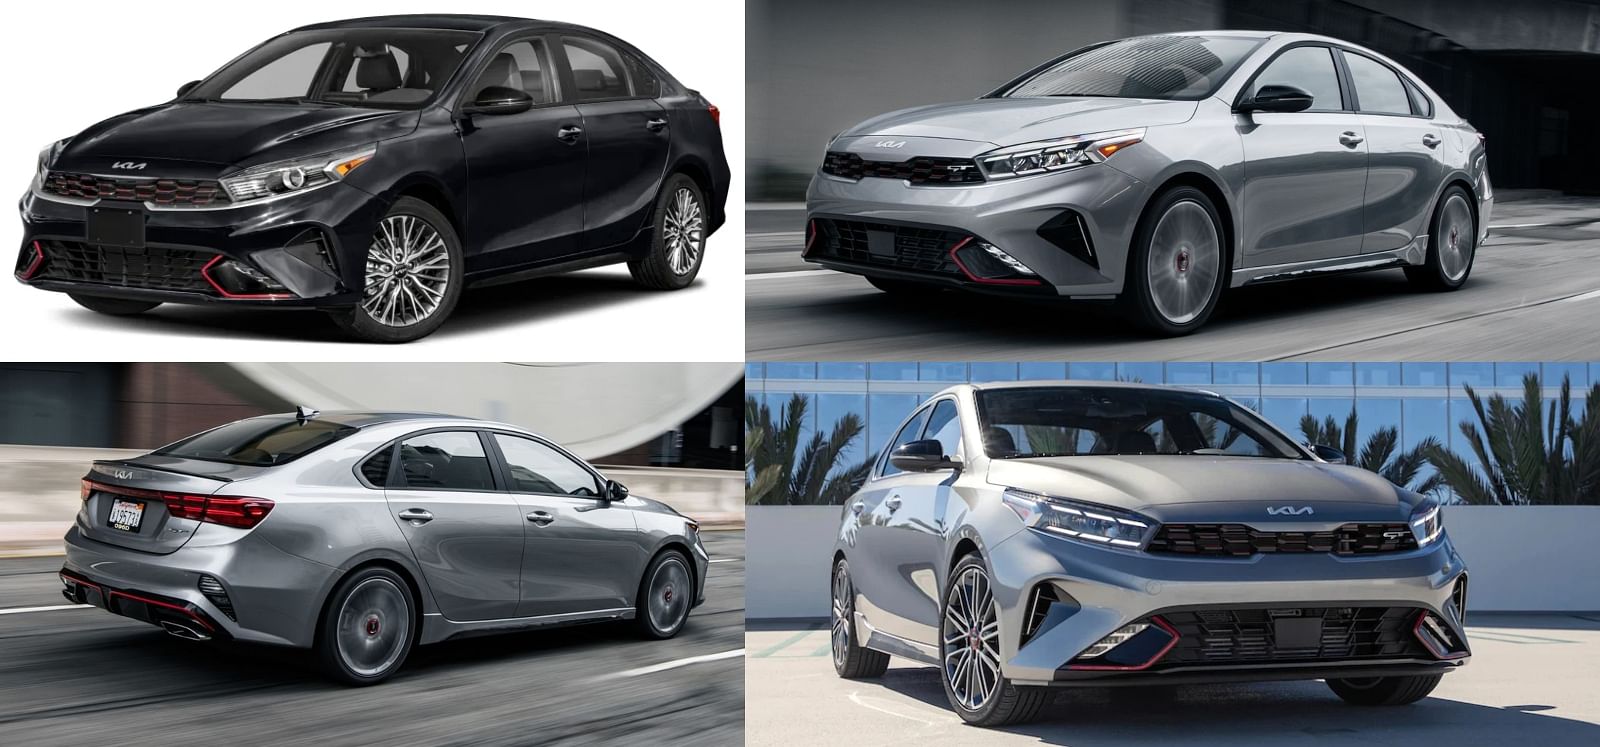 Have A Look At The Fastest Sedans Under $30k